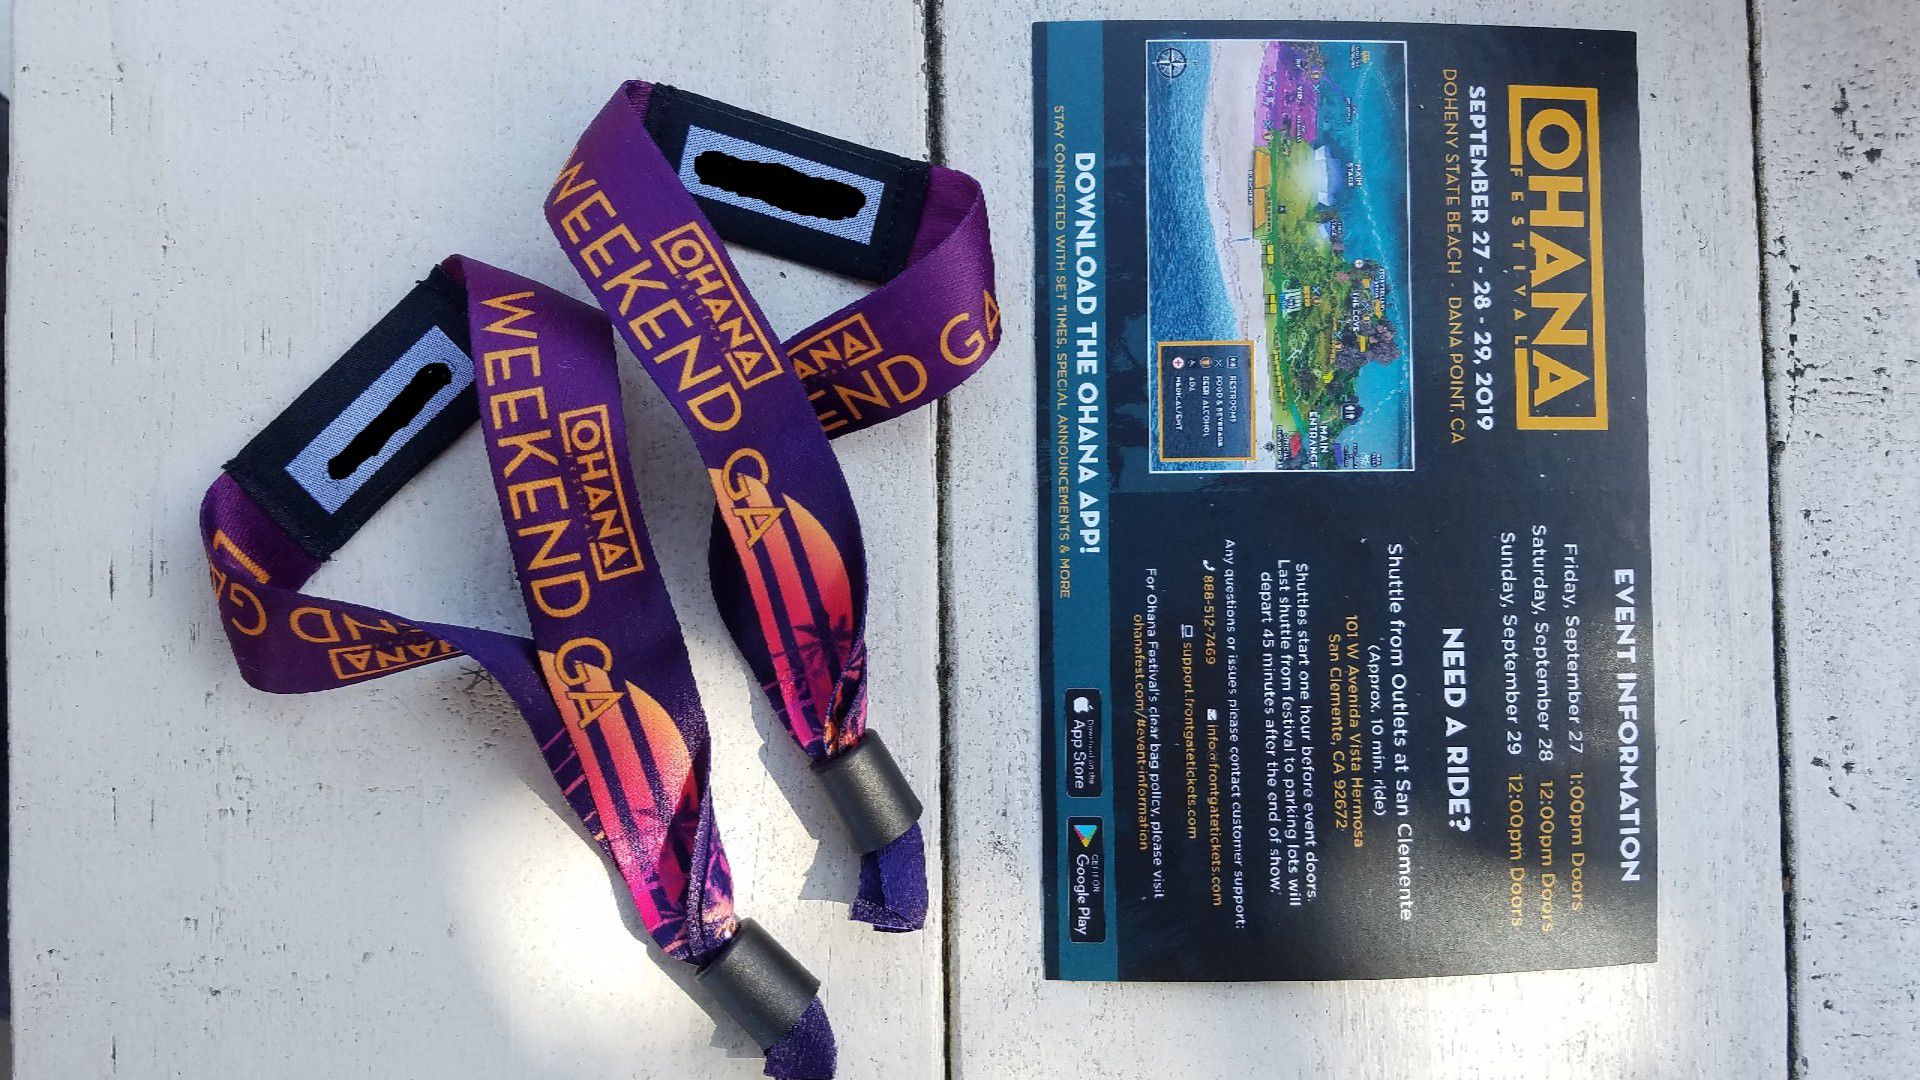 Ohana Music Festival! I have 2 wristbands & both are 3 day passes